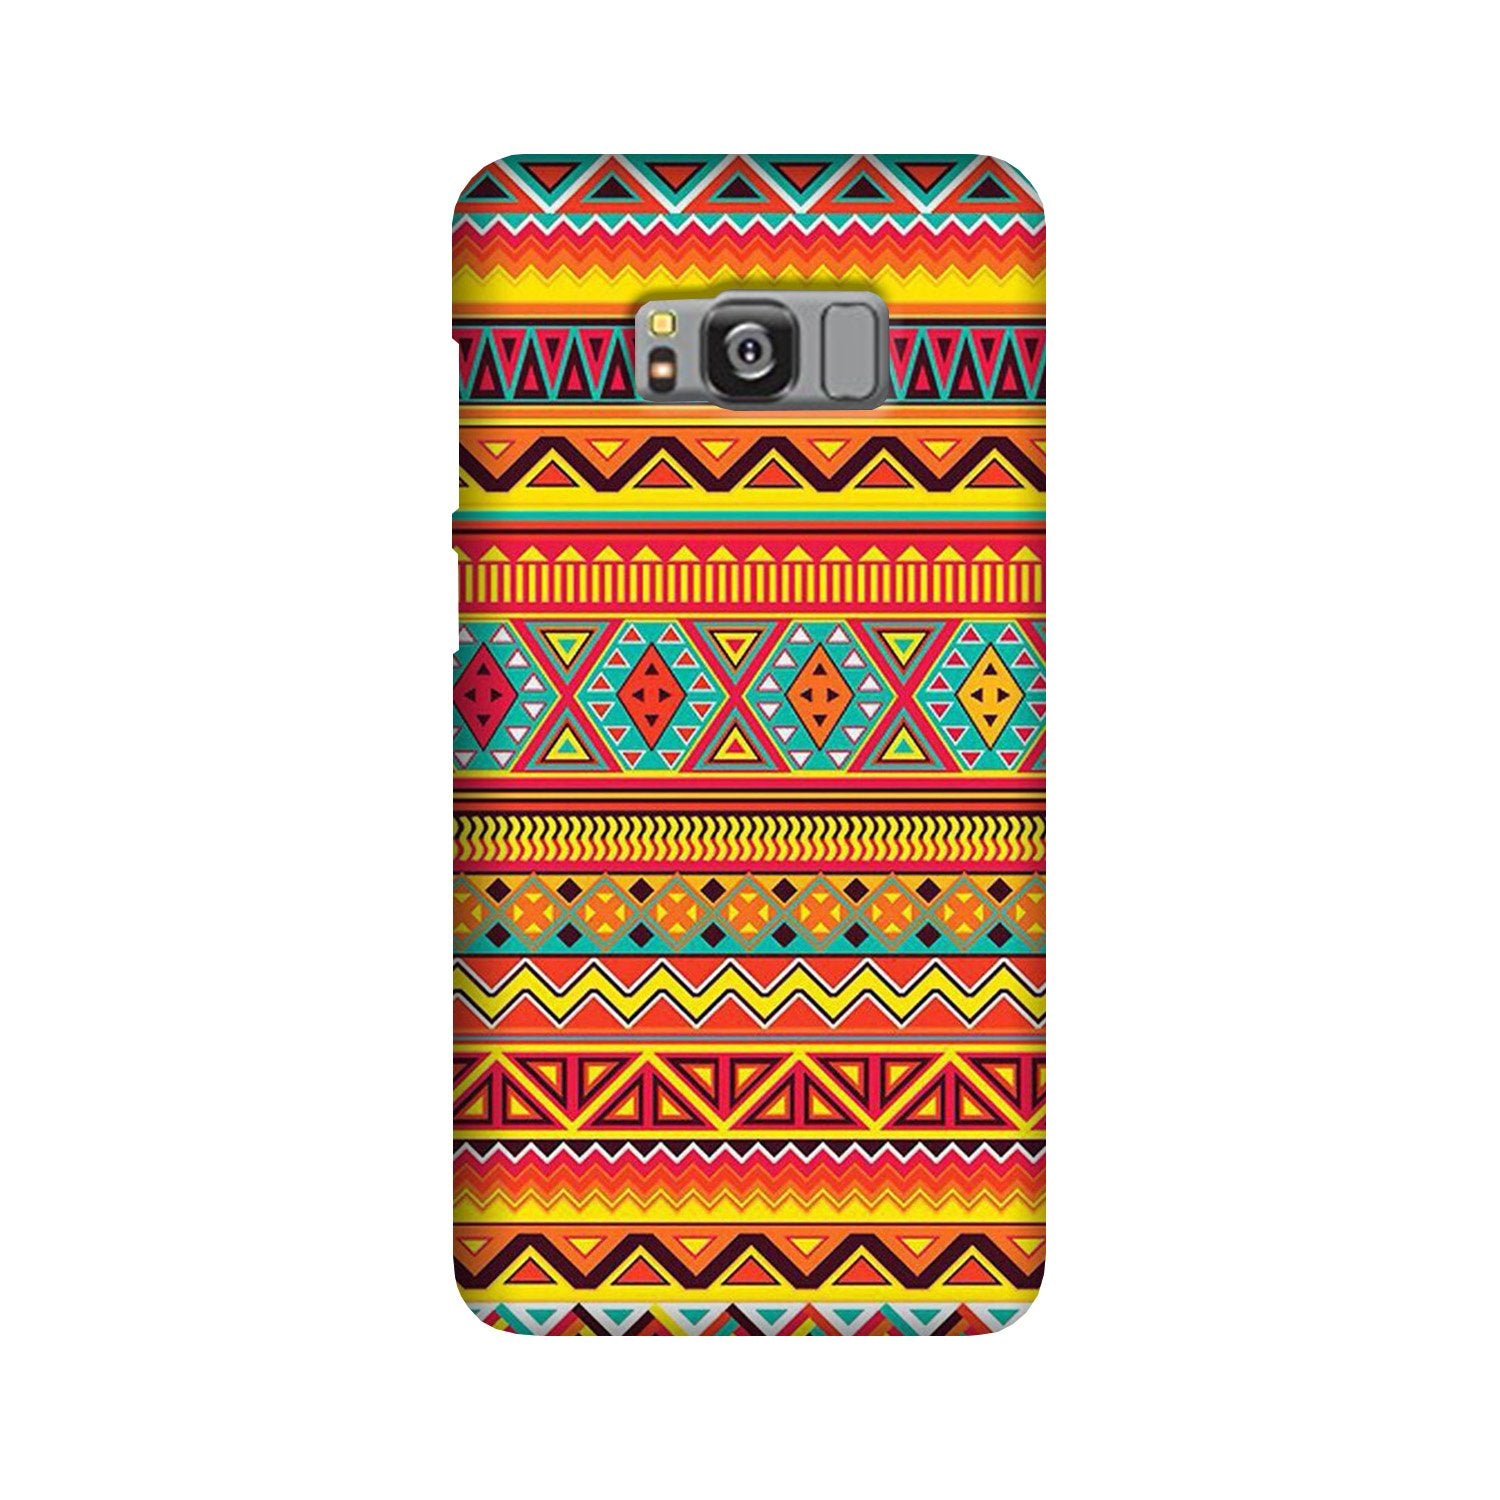 Zigzag line pattern Case for Galaxy S8